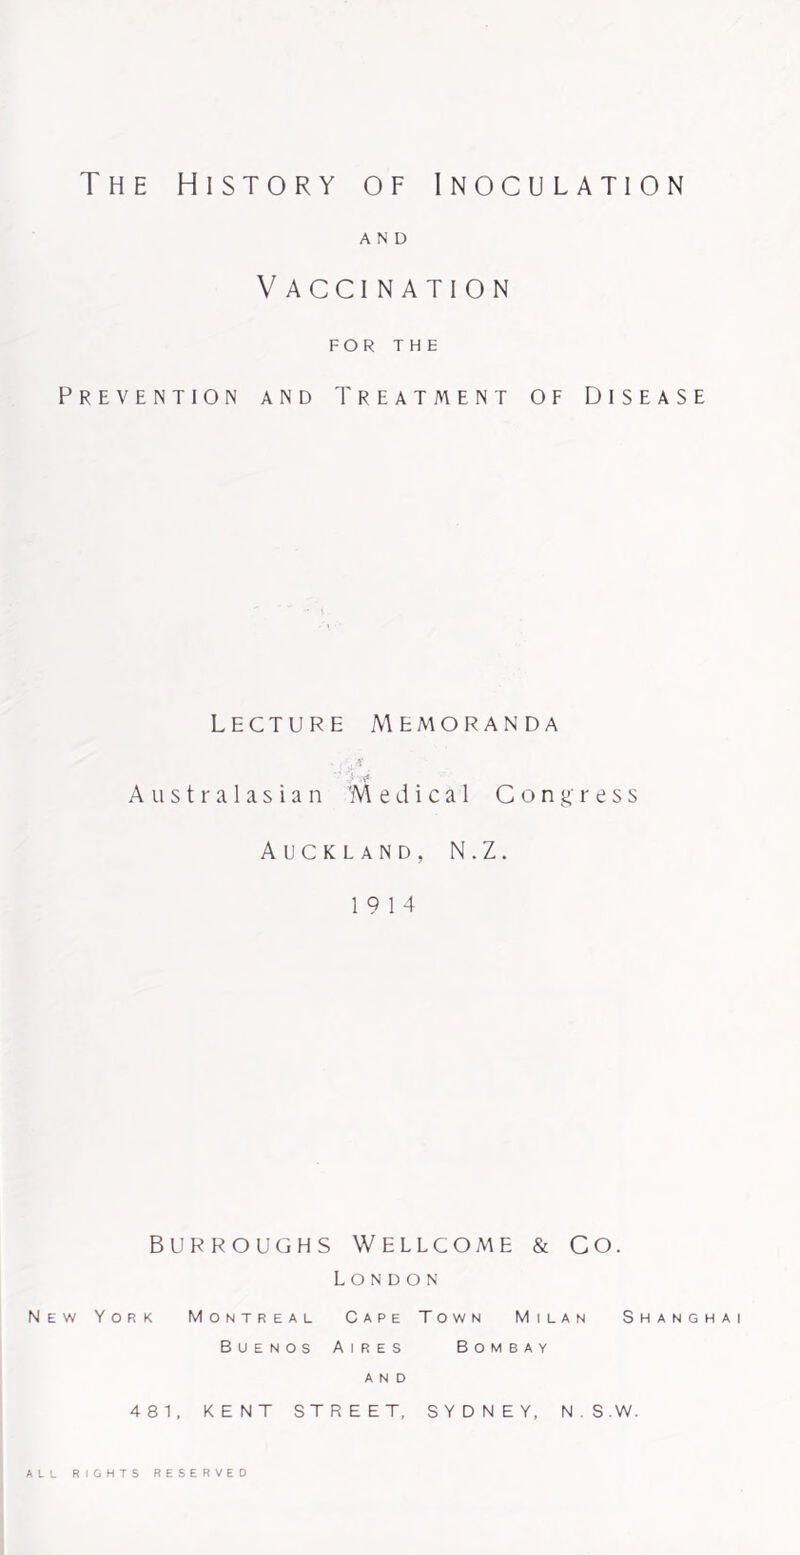 The History of Inoculation AND V ACCI NATION FOR THE Prevention and Treatment of Disease Lecture Memoranda Australasian 'Medical Congress Auckland, N.Z. 19 14 BURROUGHS Wellcome & Co. London New York Montreal Cape Town Milan Shanghai Buenos Aires Bombay AND 481, KENT STREET, SYDNEY, N.S.W. ALL RIGHTS RESERVED